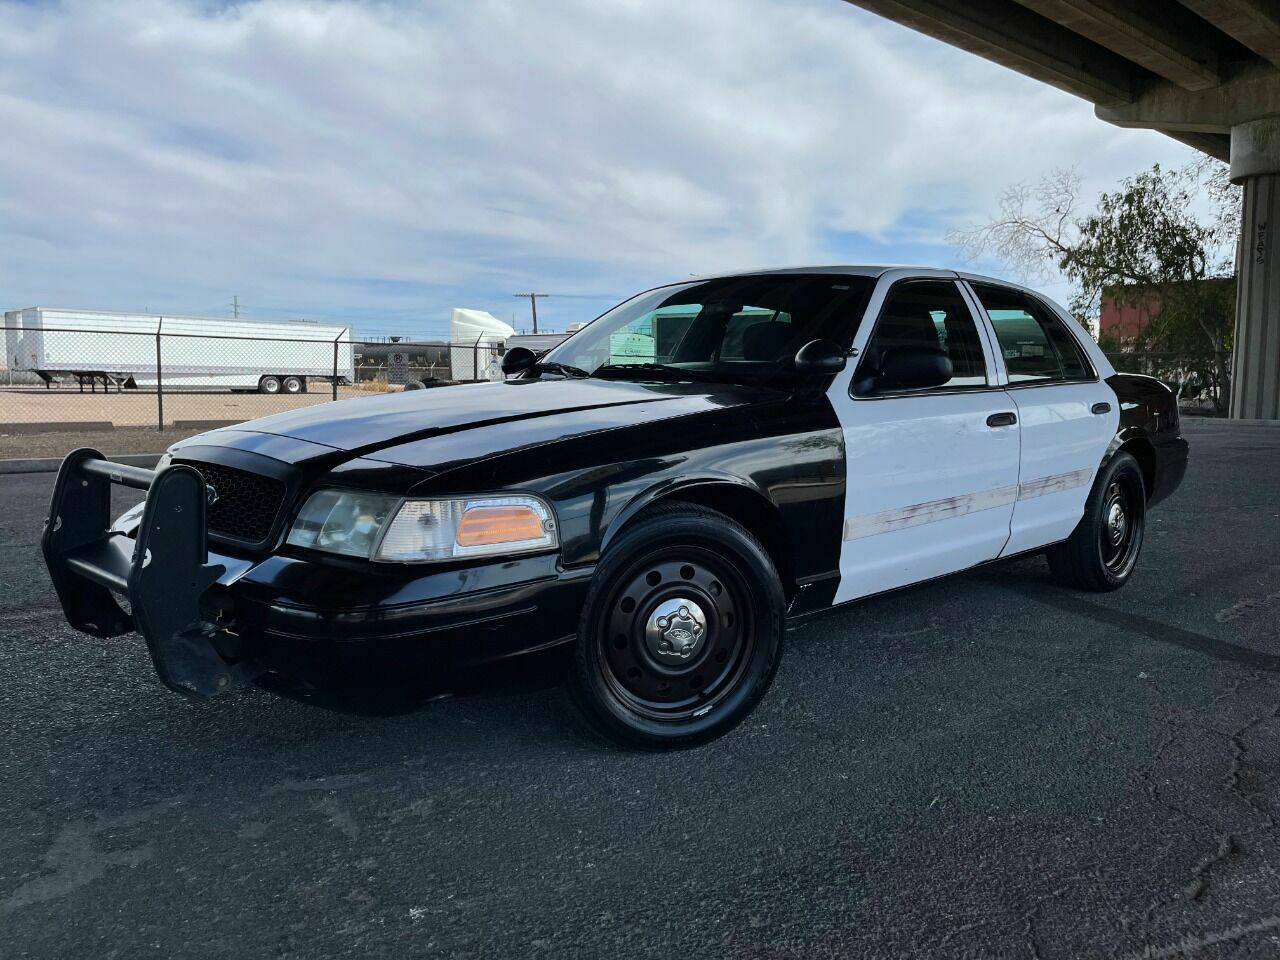 2011 Ford Crown Victoria Police Interceptor 4dr Sedan (3.27 Axle) 2011 Ford Crown Victoria Police Interceptor 4dr Sedan (3.27 Axle)